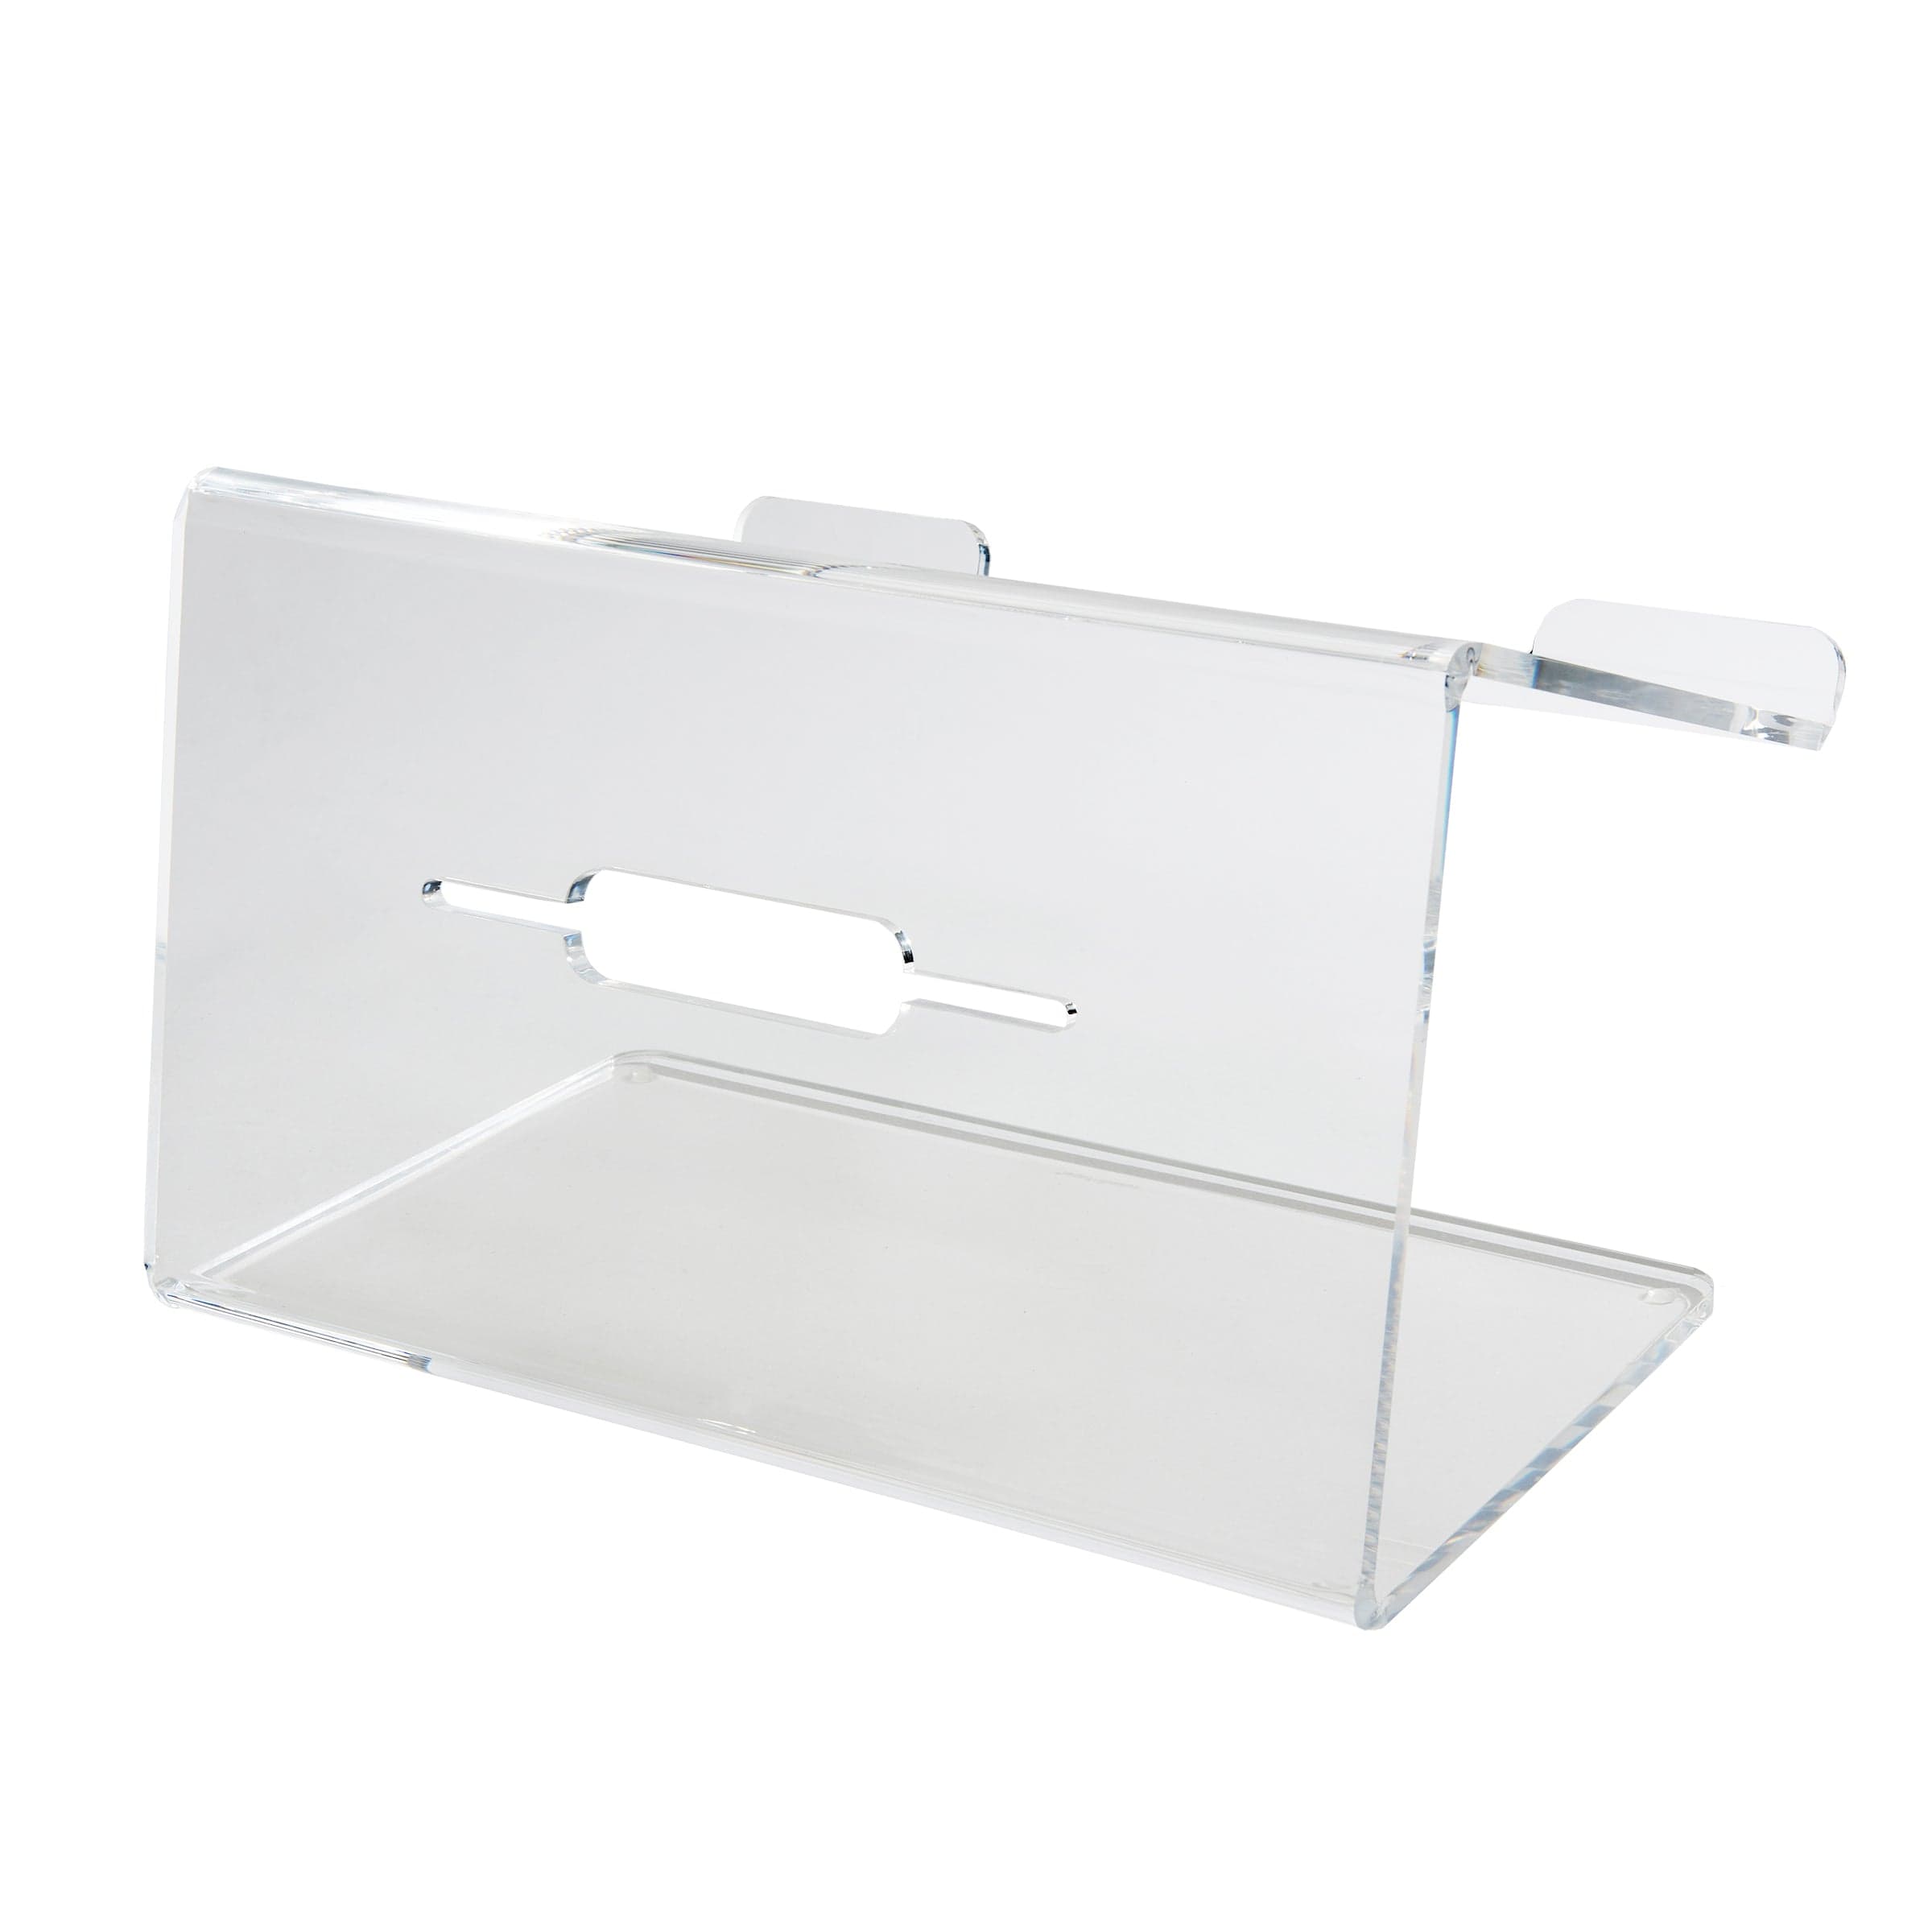 Clear Acrylic Laptop Stand, 14 x 12.125 x 8.75, with Cable Management,  For Up to 16 Laptops (51183)